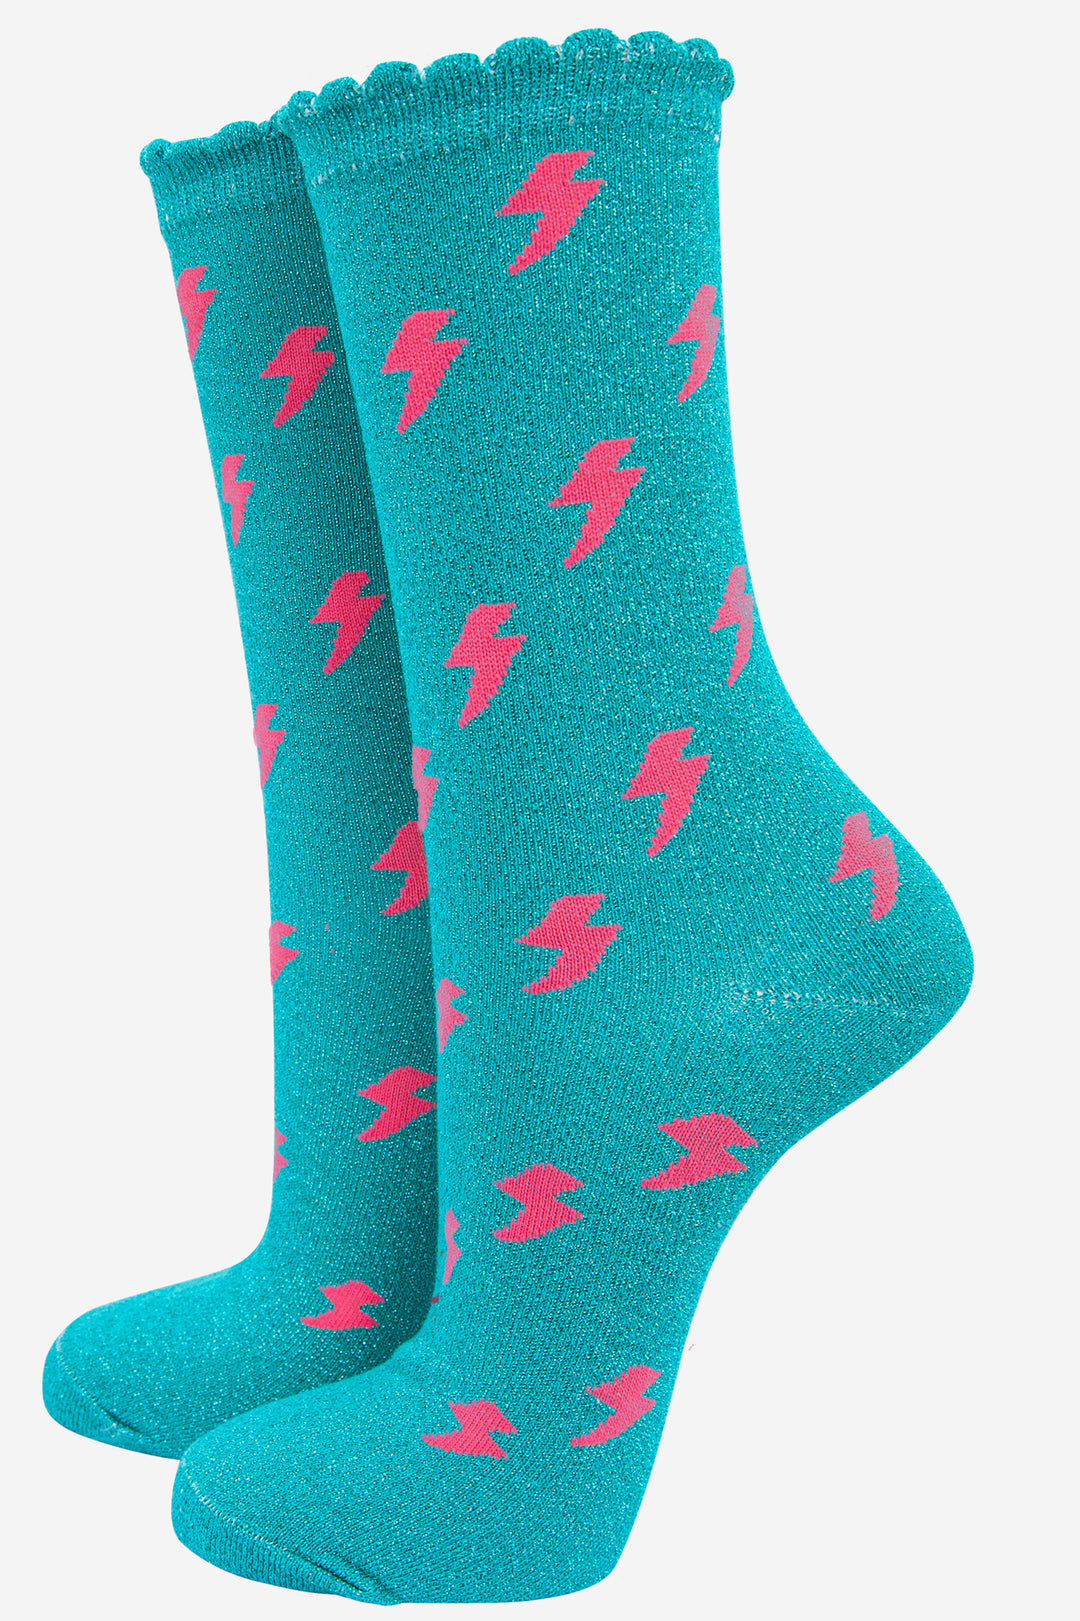 turquoise blue glitter socks with an all over pink lightning bolt pattern and glittery sparkle